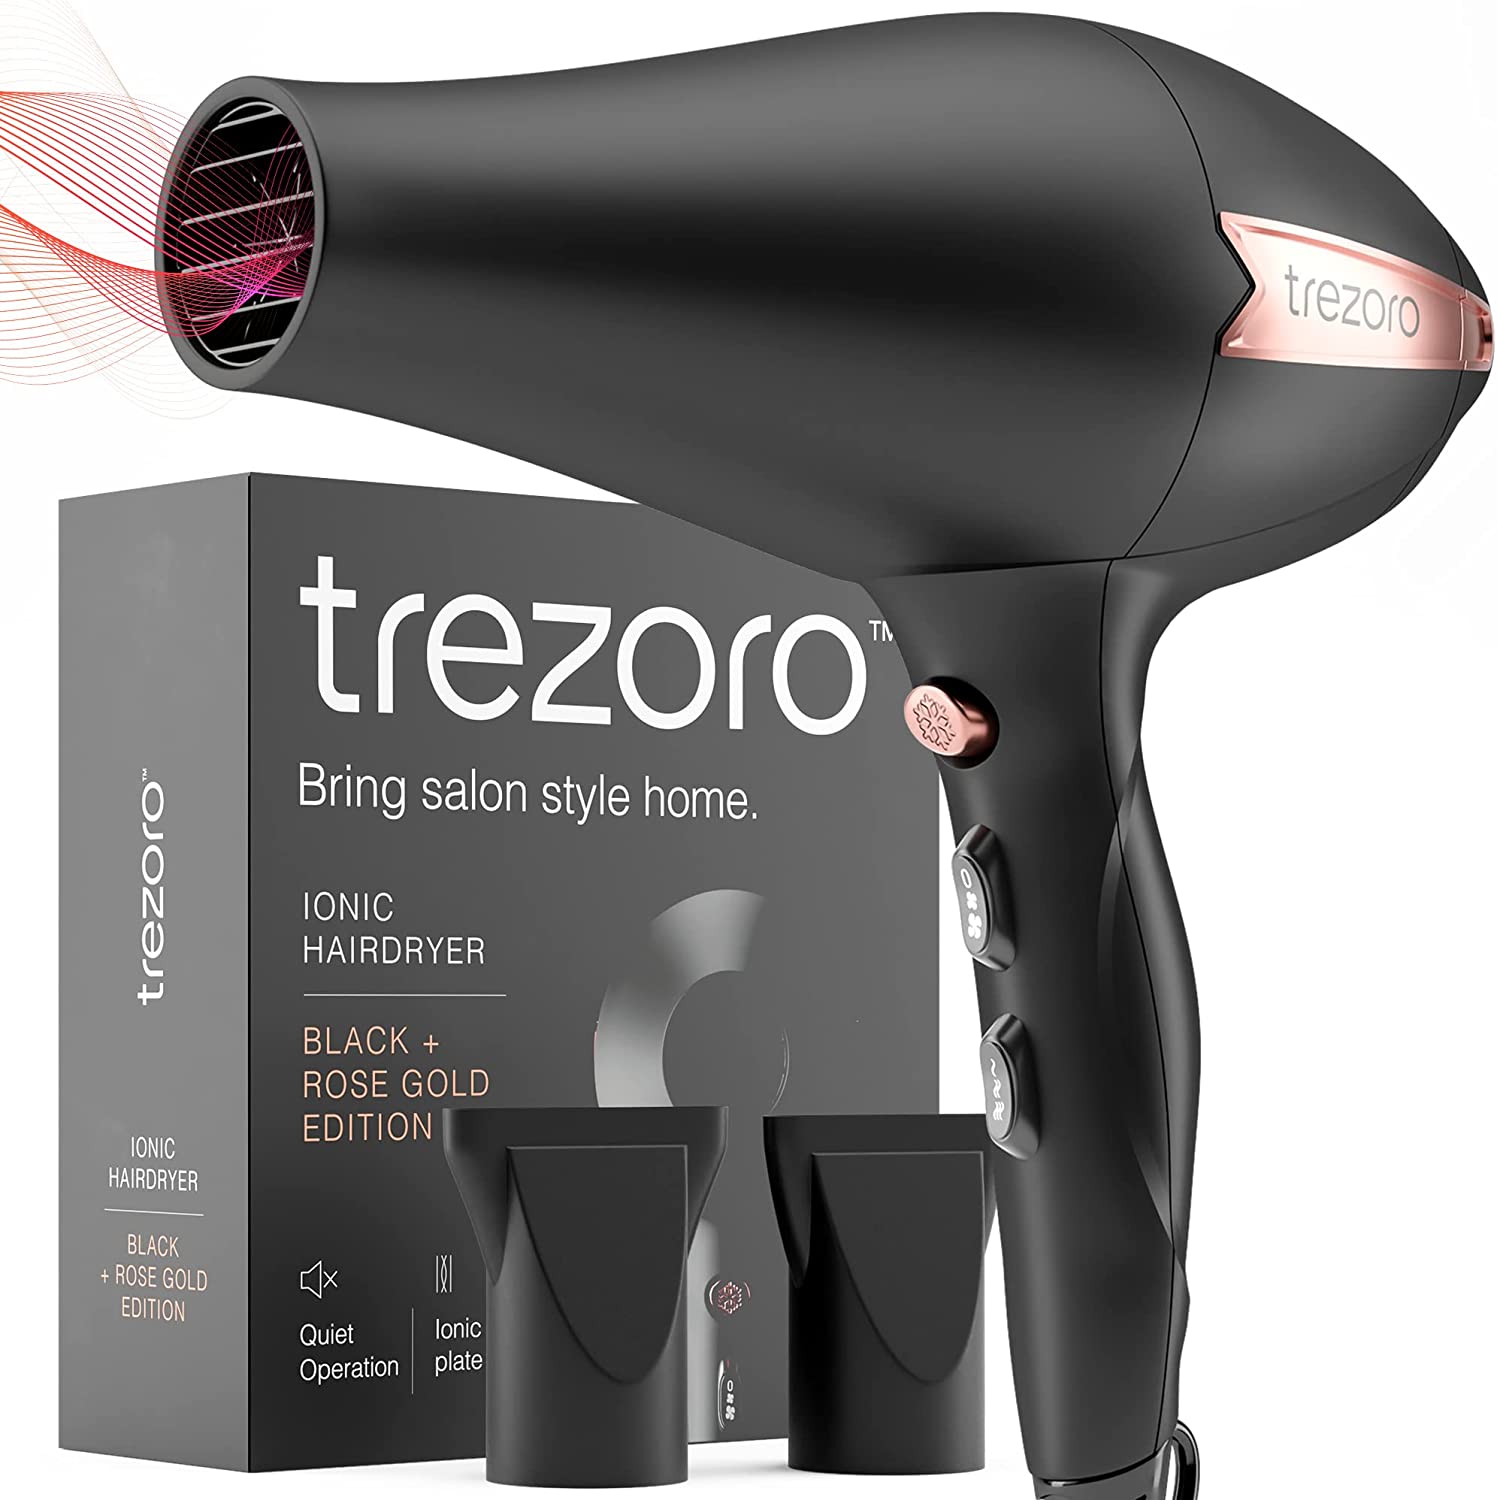 The Best Lightweight Hair Dryer To Let You Look Your Best of 2023